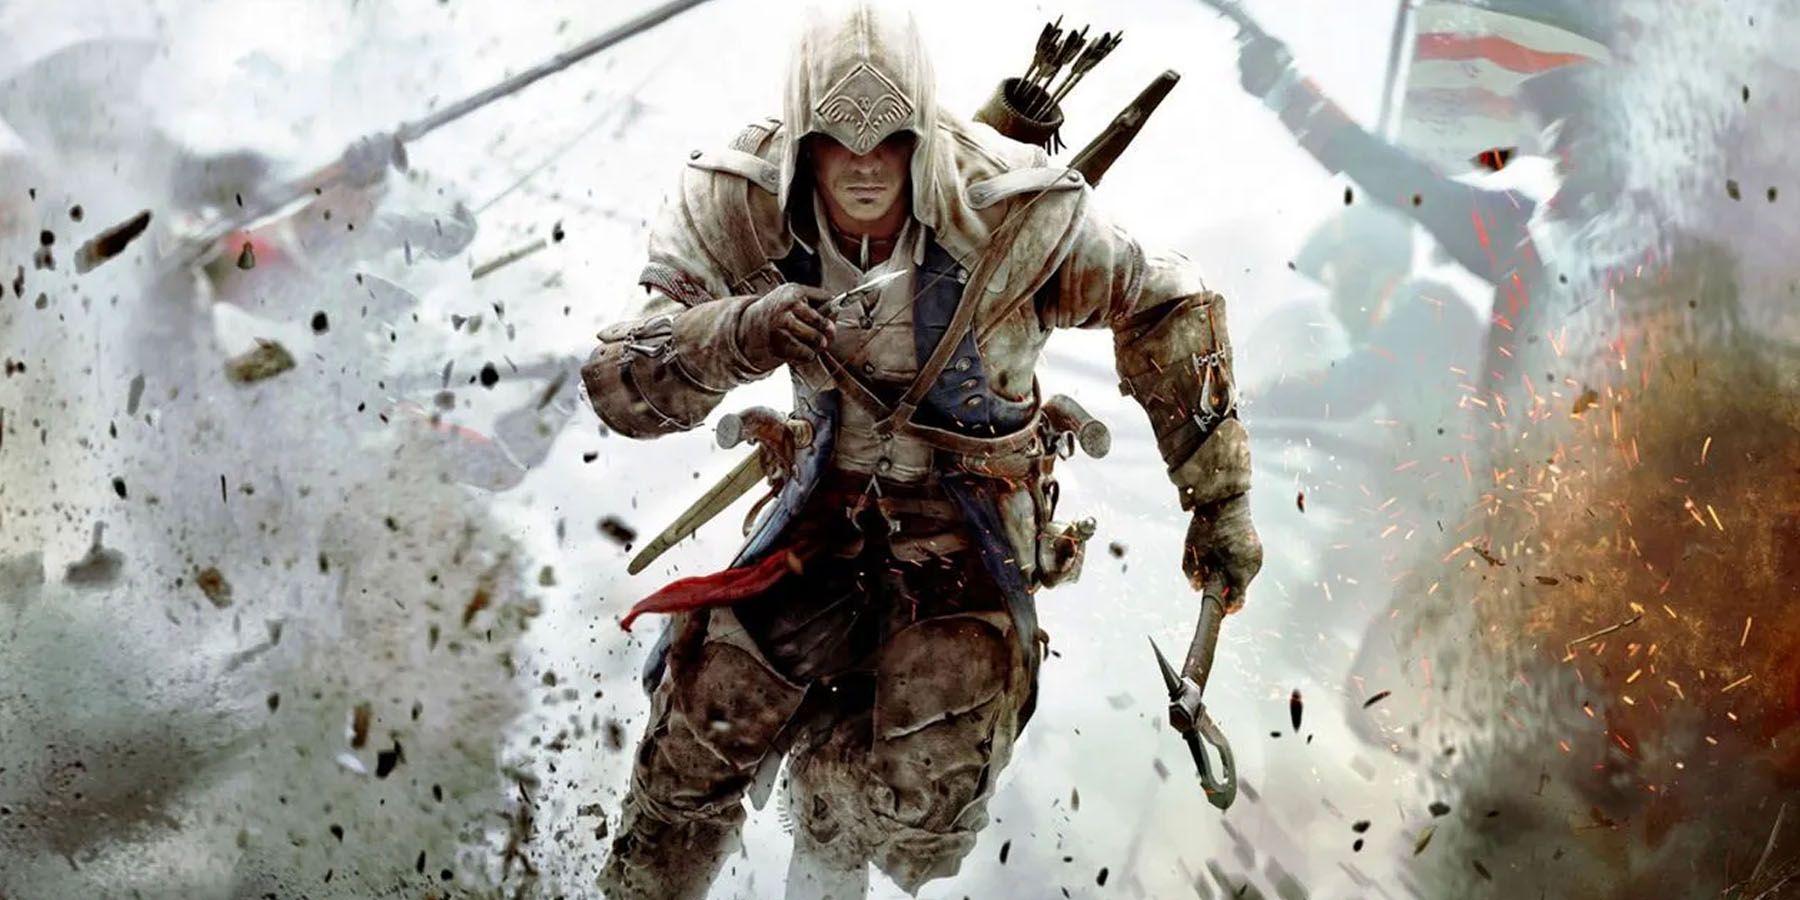 AC3] Connor Kenway  Assassins creed, Assassin's creed, Assassins